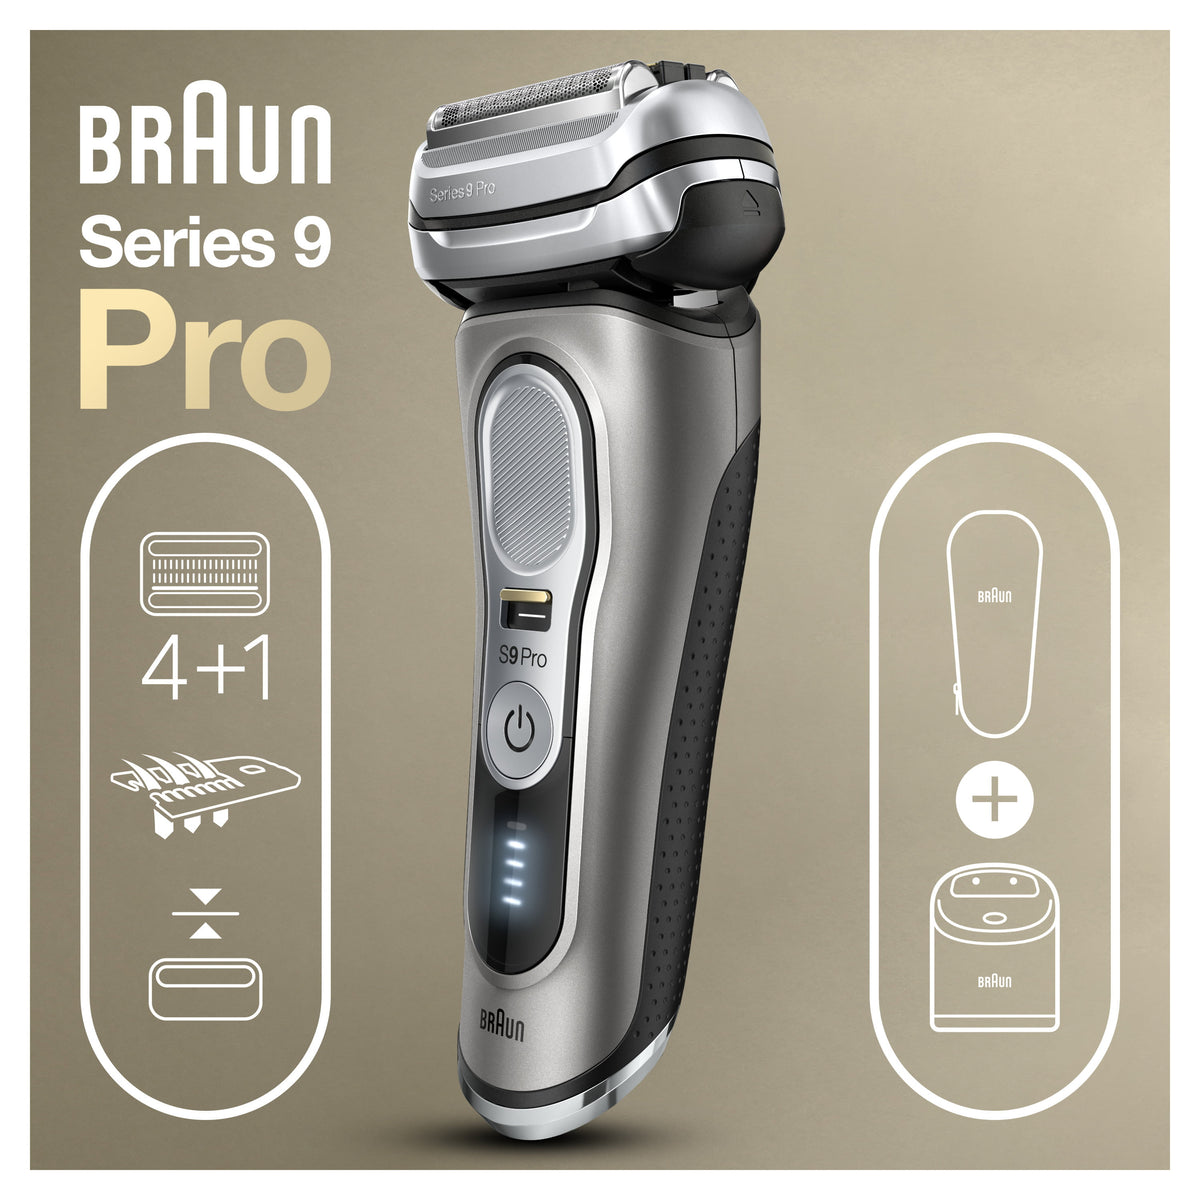 Braun Series 9 Pro Review: Get a super-close shave